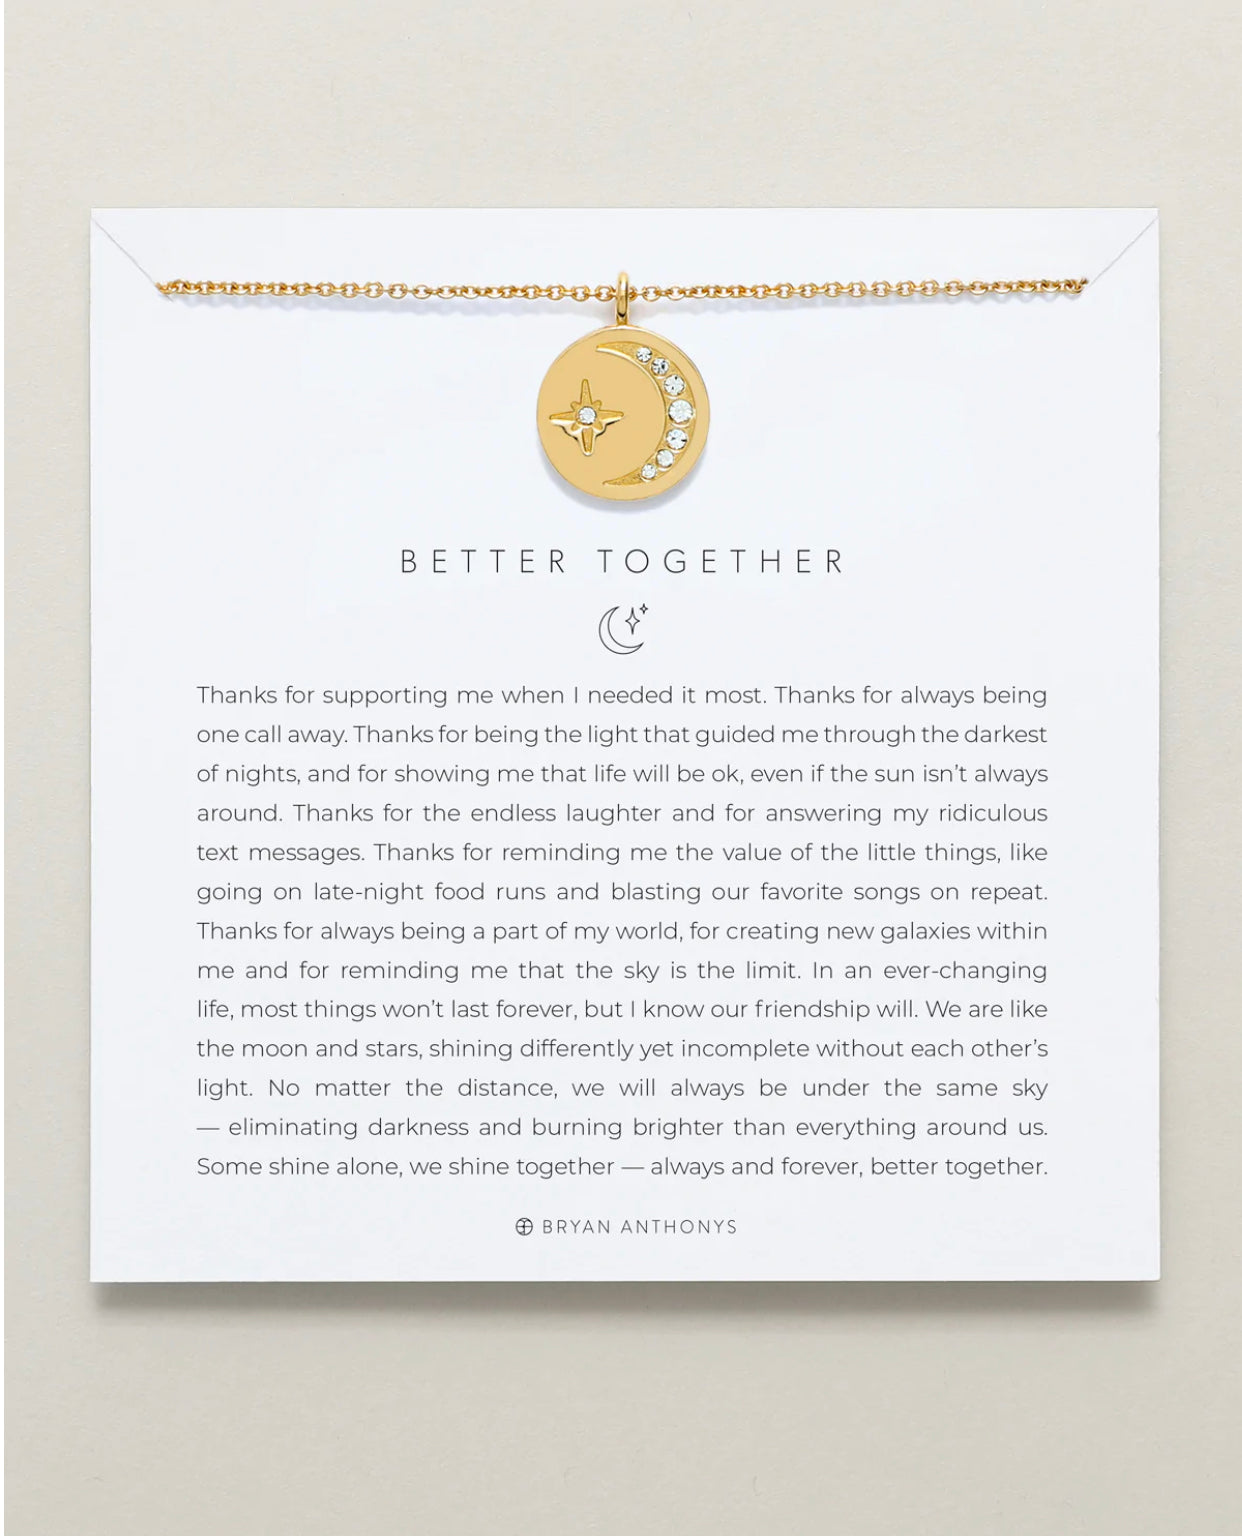 Better Together Necklace-Bryan Anthonys